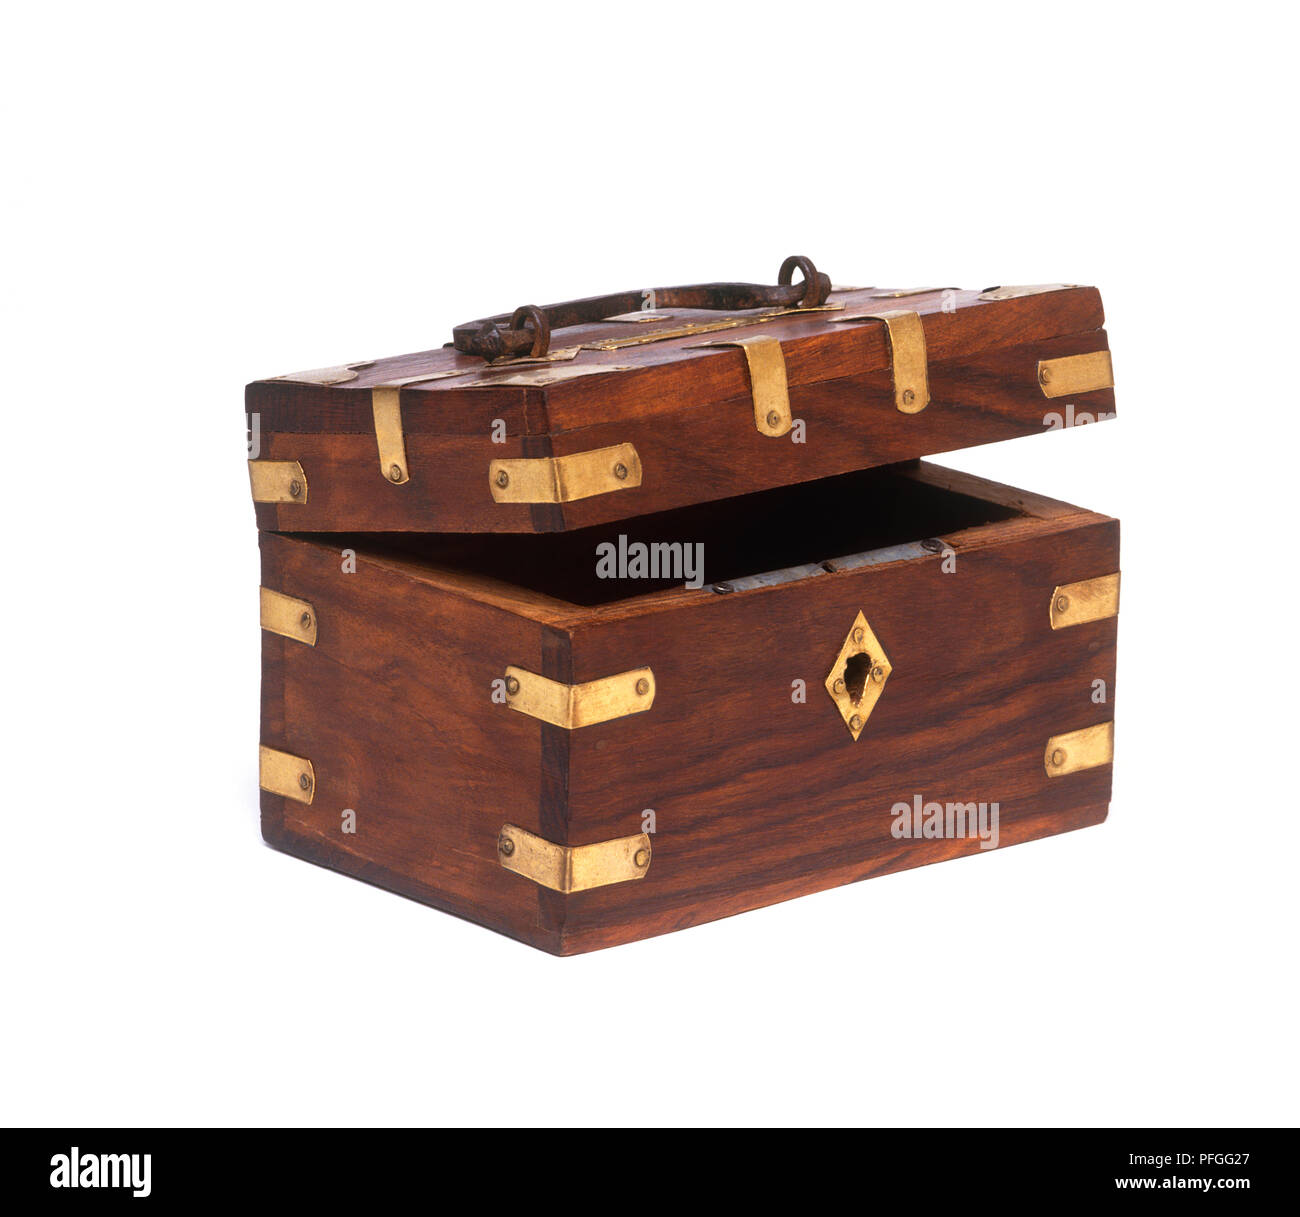 Wooden chest with brass fittings Stock Photo